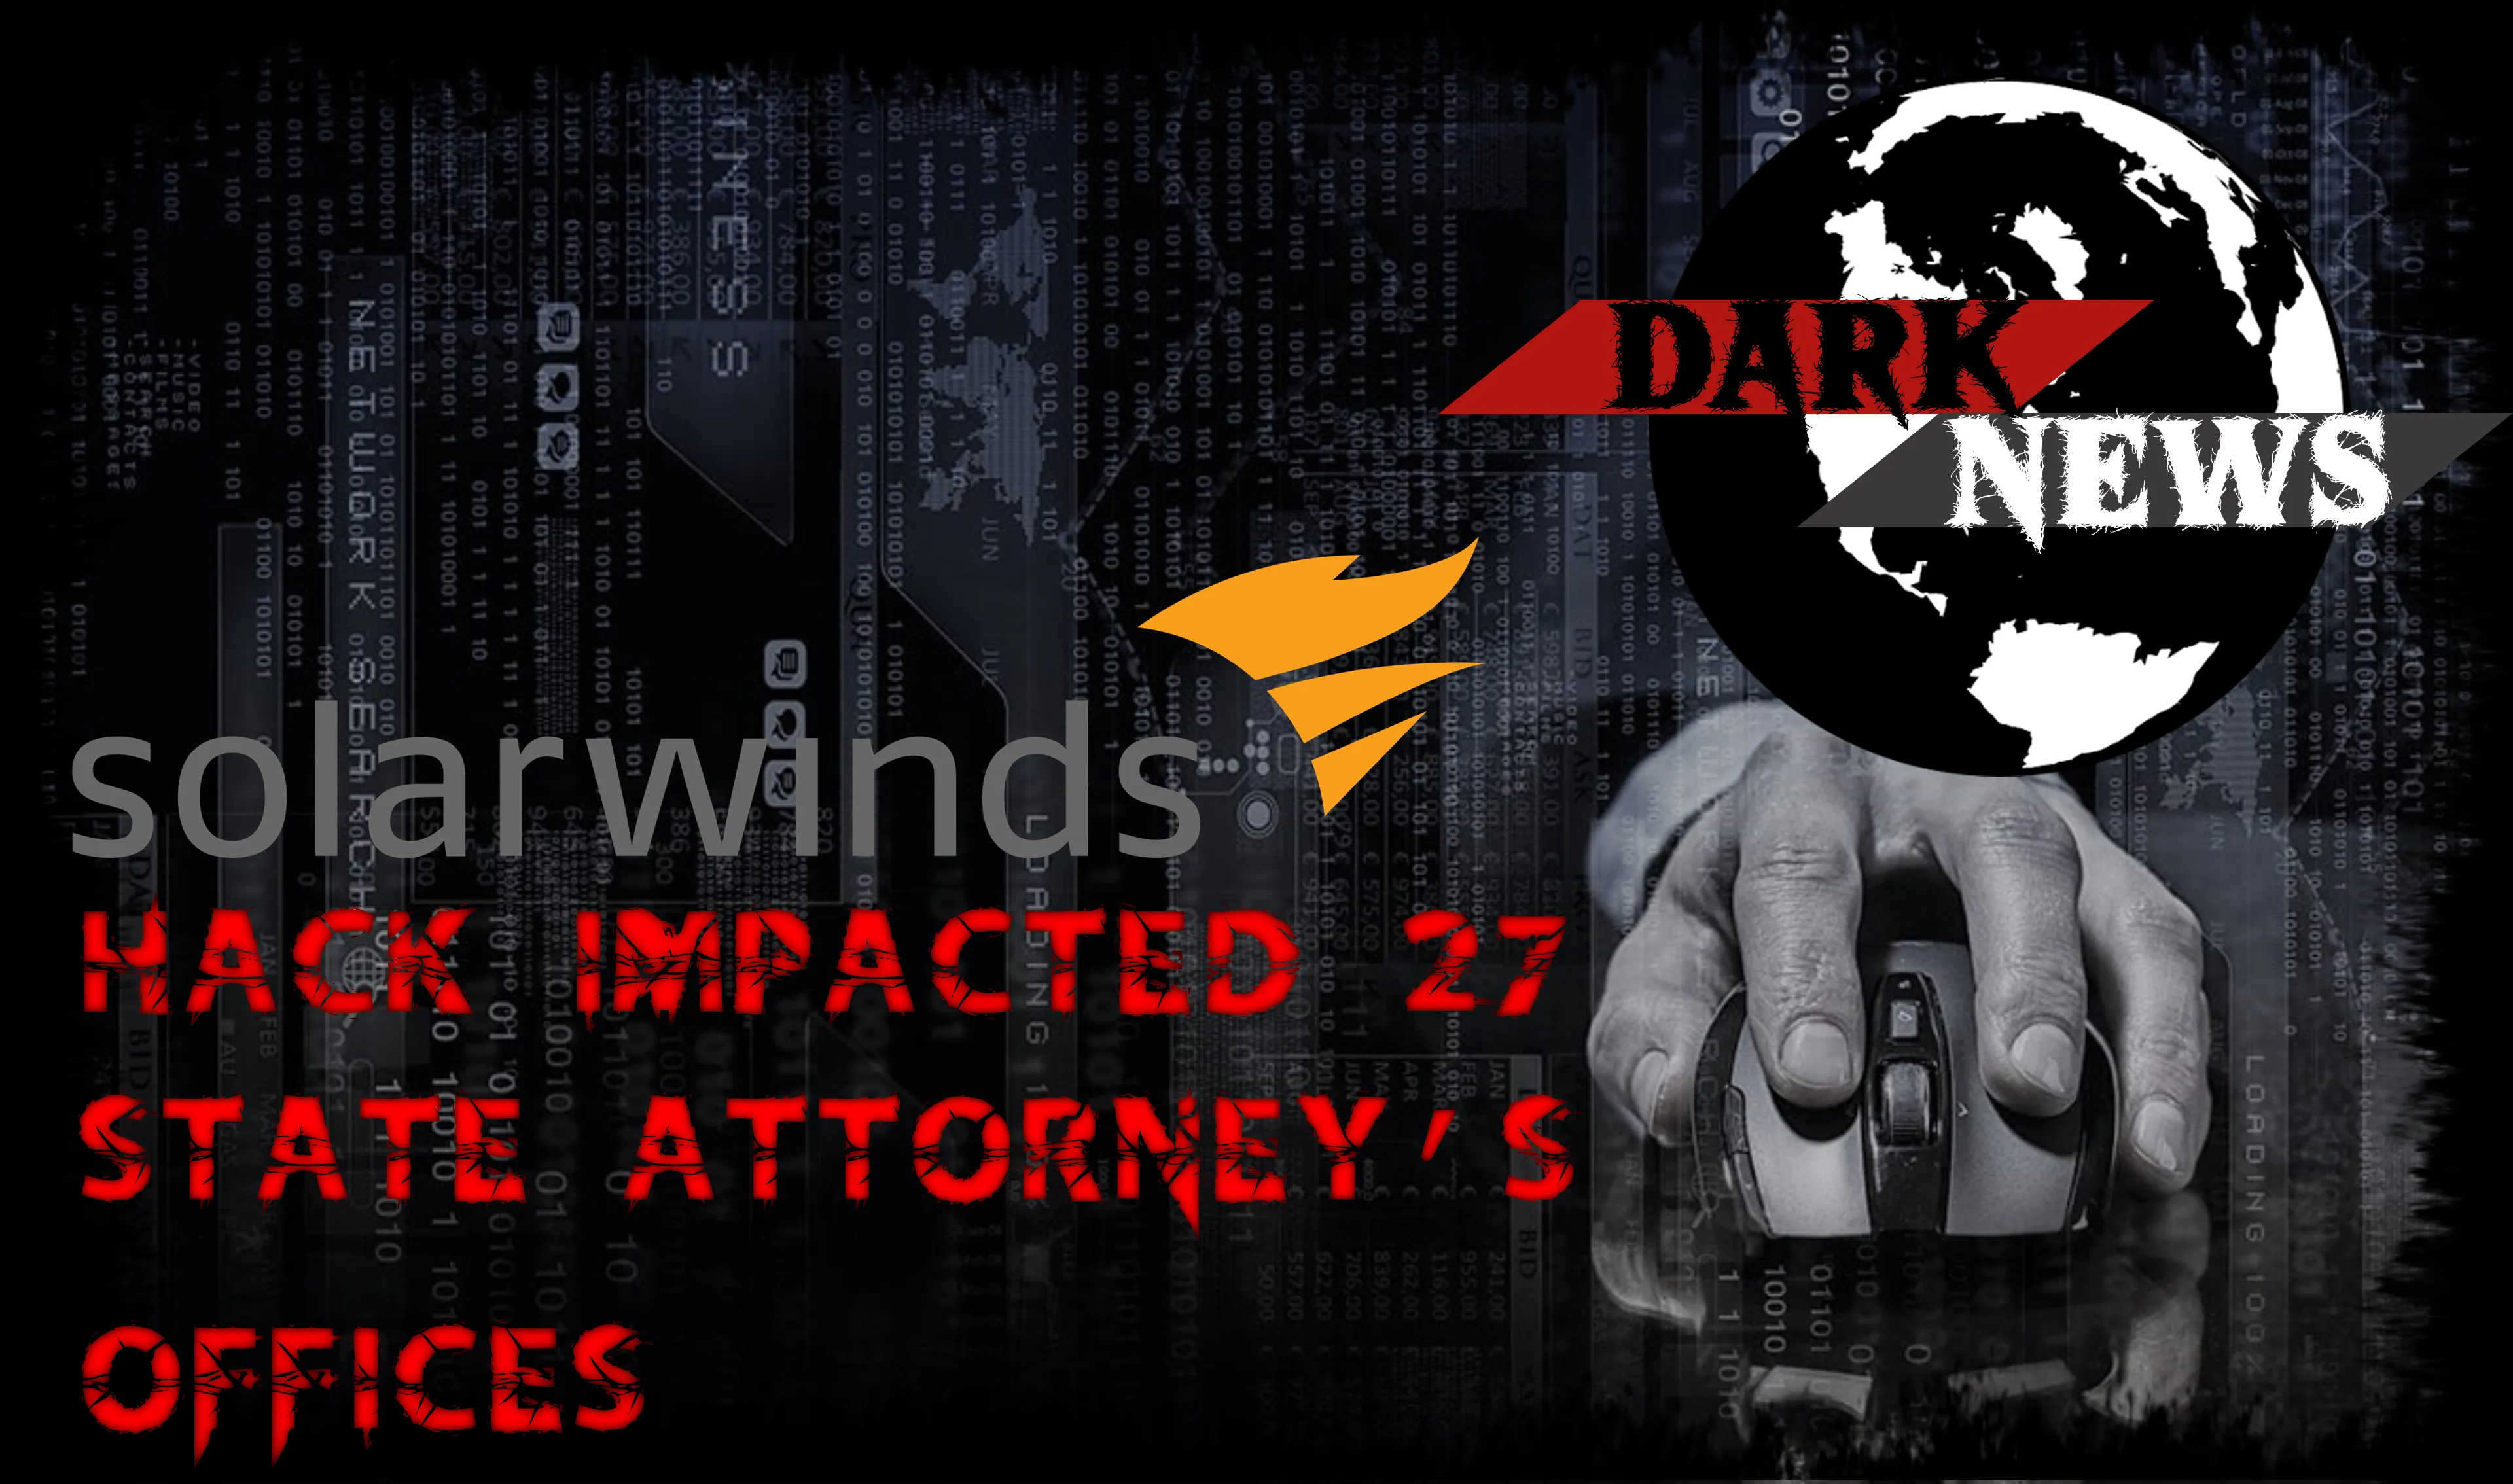 SolarWinds hack impacted 27 state attorneys’ offices : DOJ